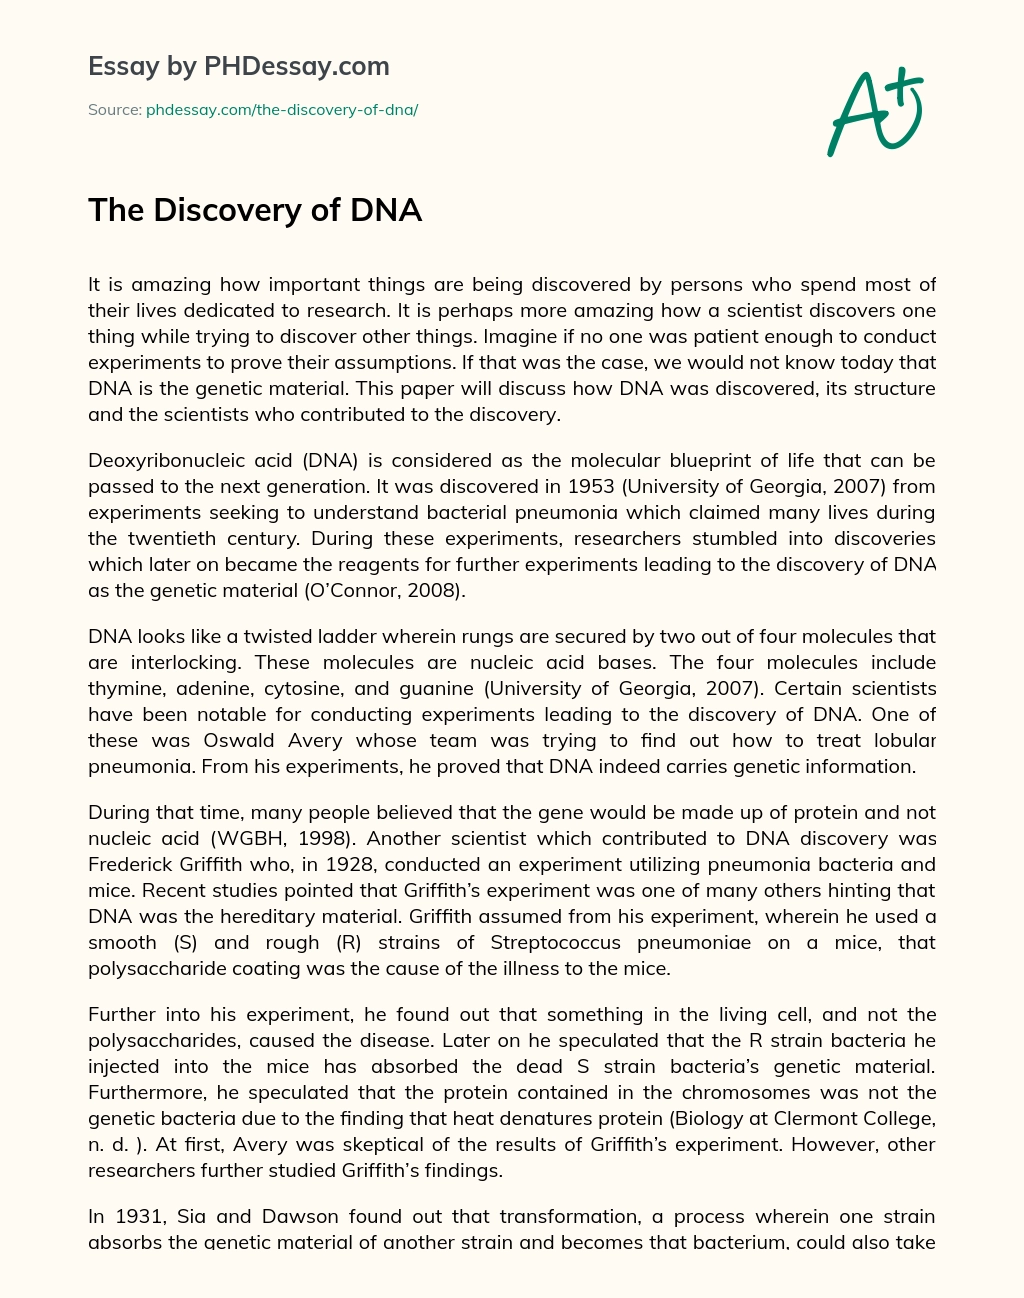 Реферат: DNA Essay Research Paper Nucleotides are important